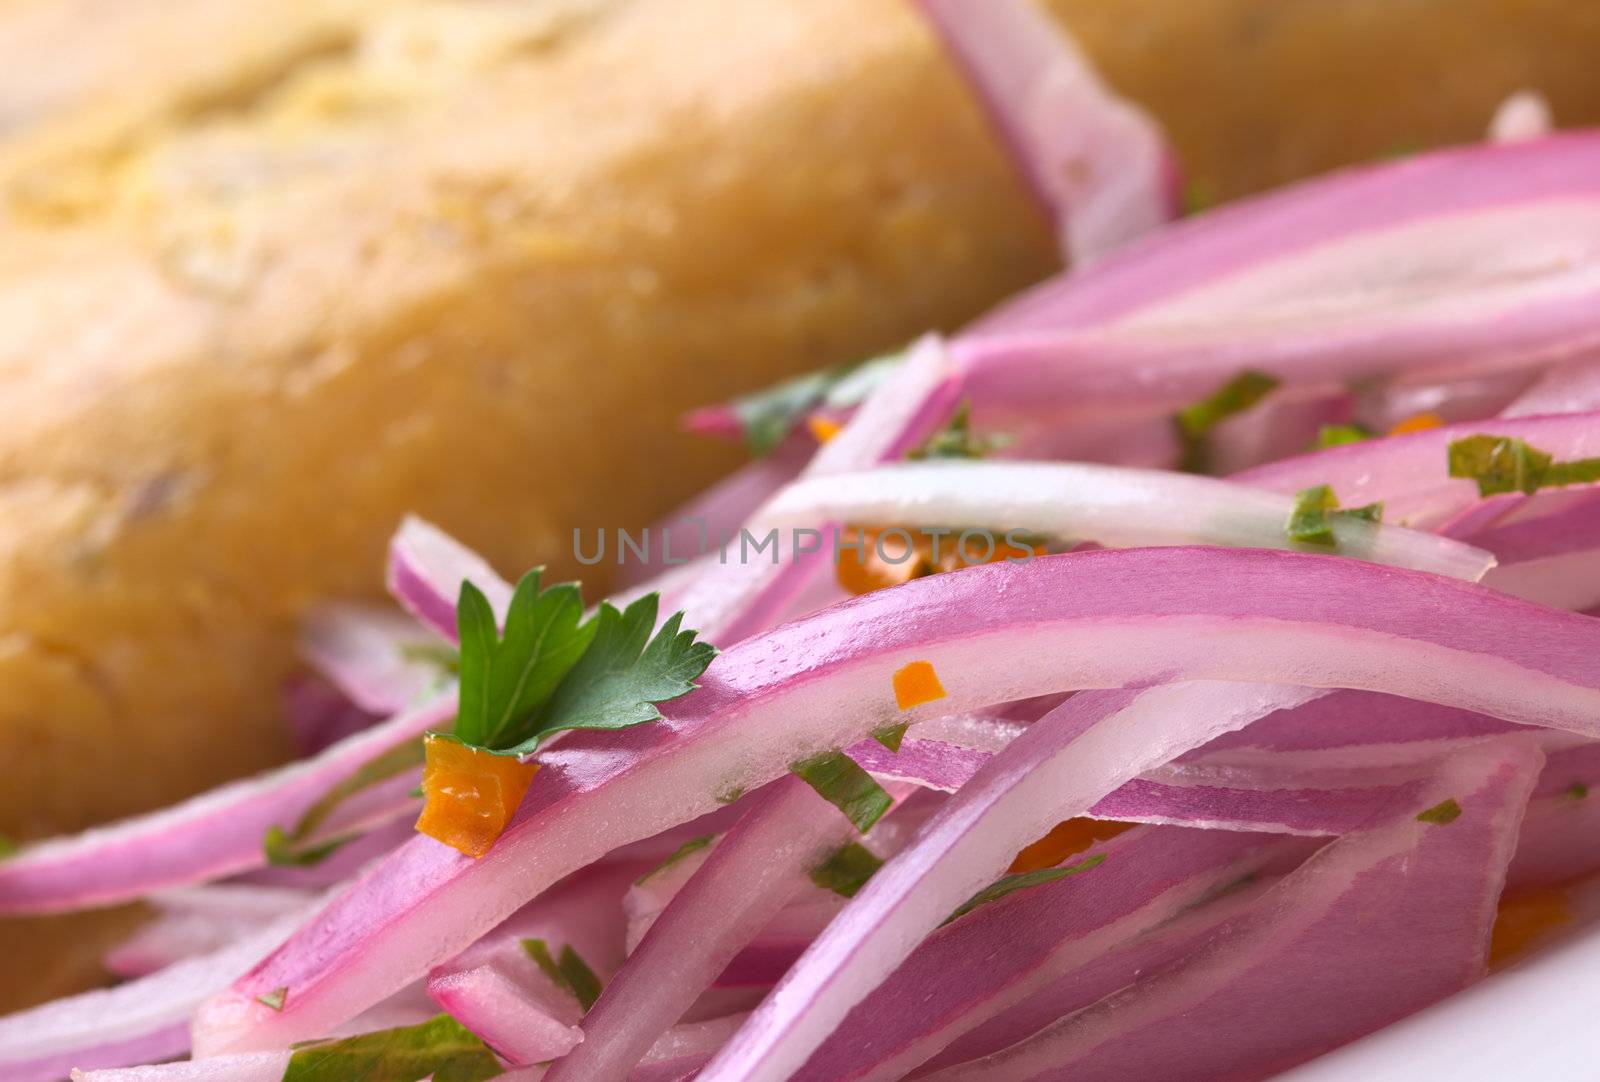 Peruvian Salsa Criolla made of red onion slices, hot pepper called aji, fresh parsley and limes with tamal (cooked corn traditionally eaten for breakfast) (Very Shallow Depth of Field, Focus on the parsley leaf) 